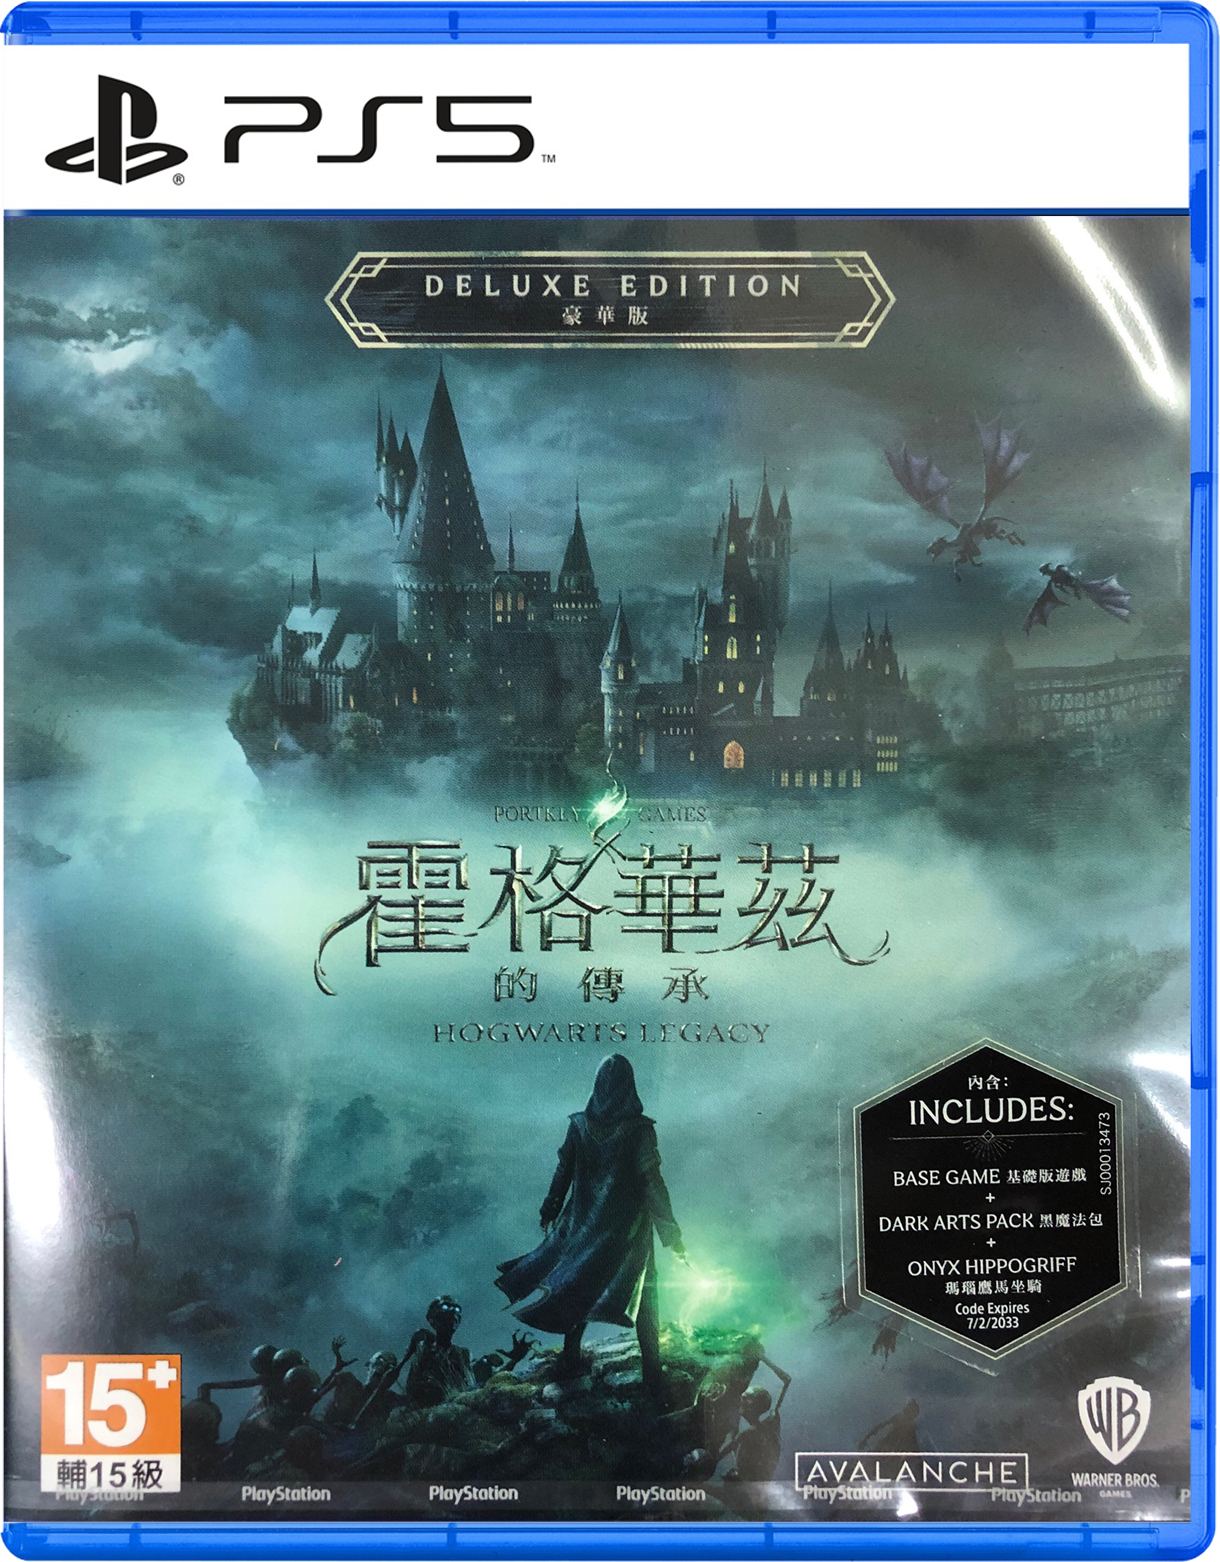 Hogwarts Legacy Deluxe – Playstation 4